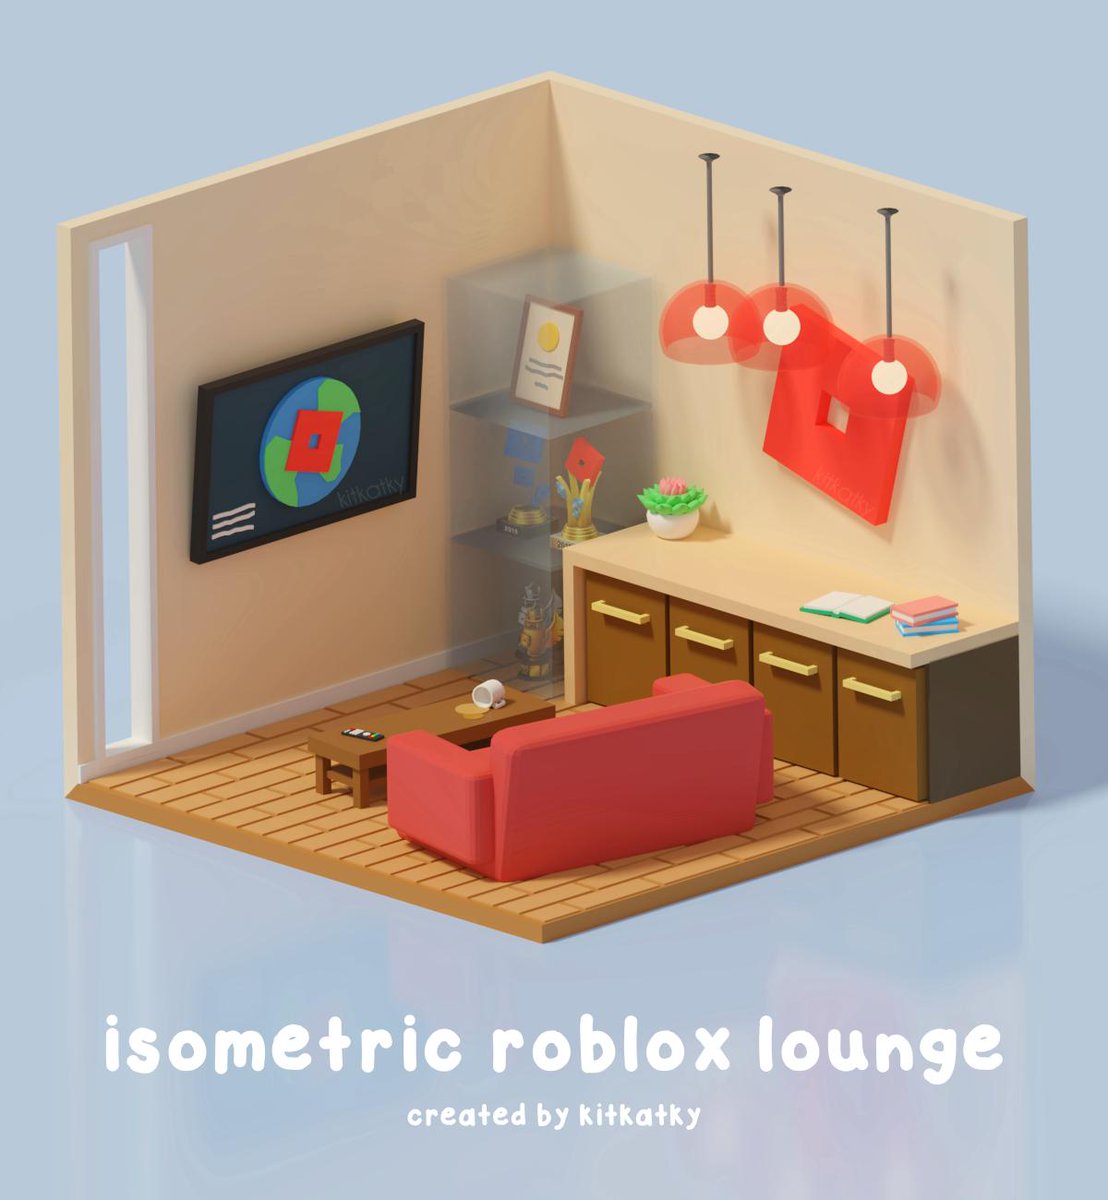 Kitkatky On Twitter An Isometric Roblox Lounge Inspired Off Reference Photos Of The Roblox Headquarters Created A 6 Minute Timelapse Of The Process If You Would Like To Check That - roblox headquarters website